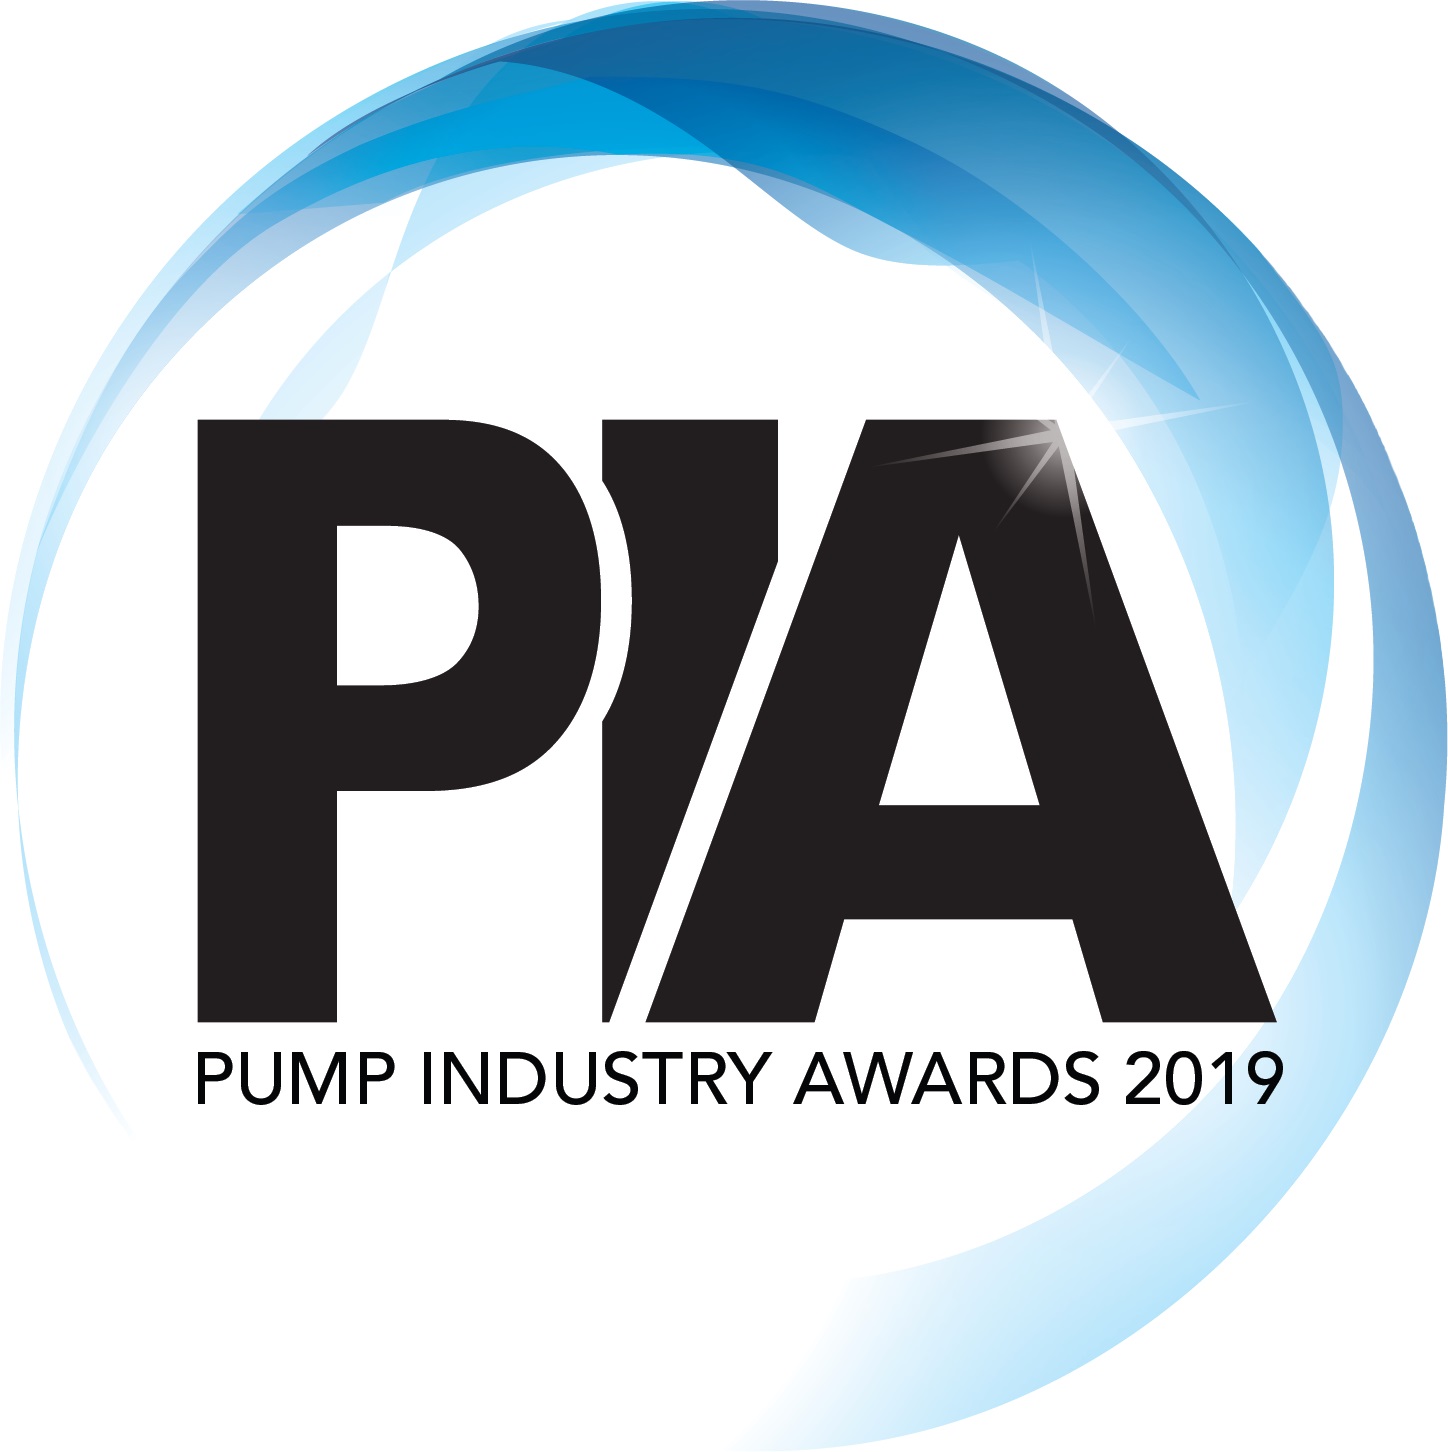 Xylem will sponsor the Supplier of the Year category at the Pump Industry Awards 2019.